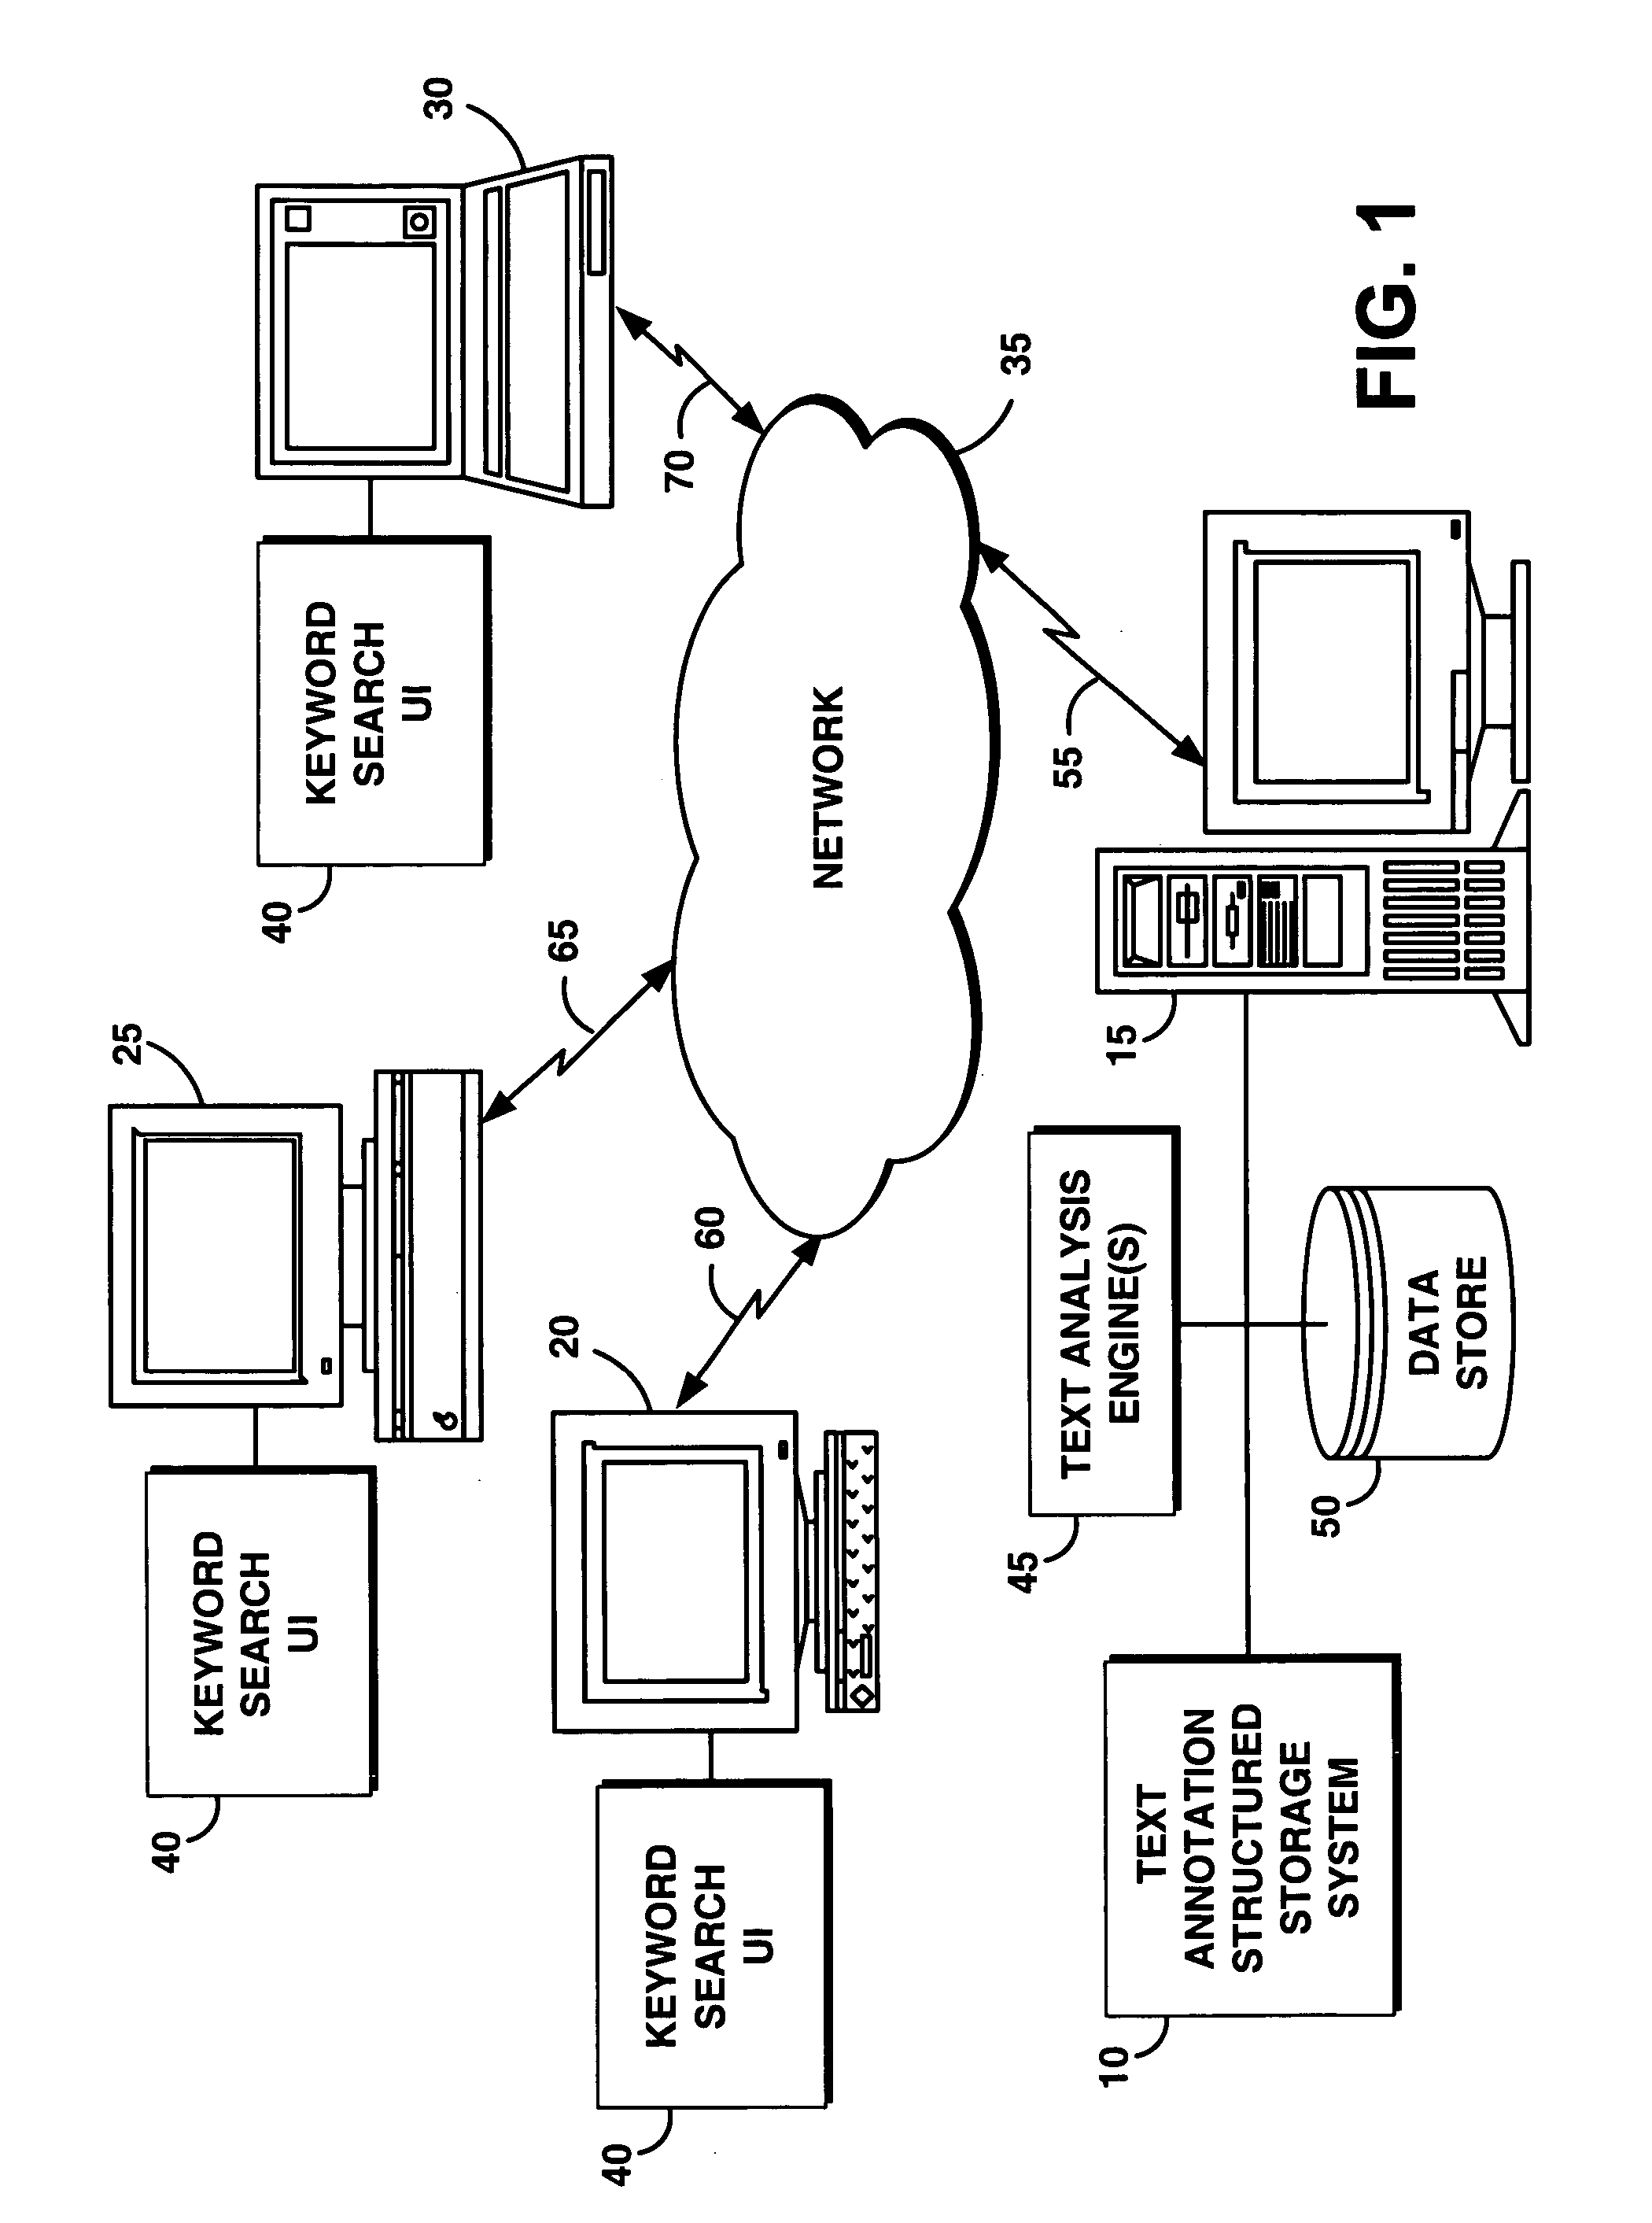 System and method for storing text annotations with associated type information in a structured data store